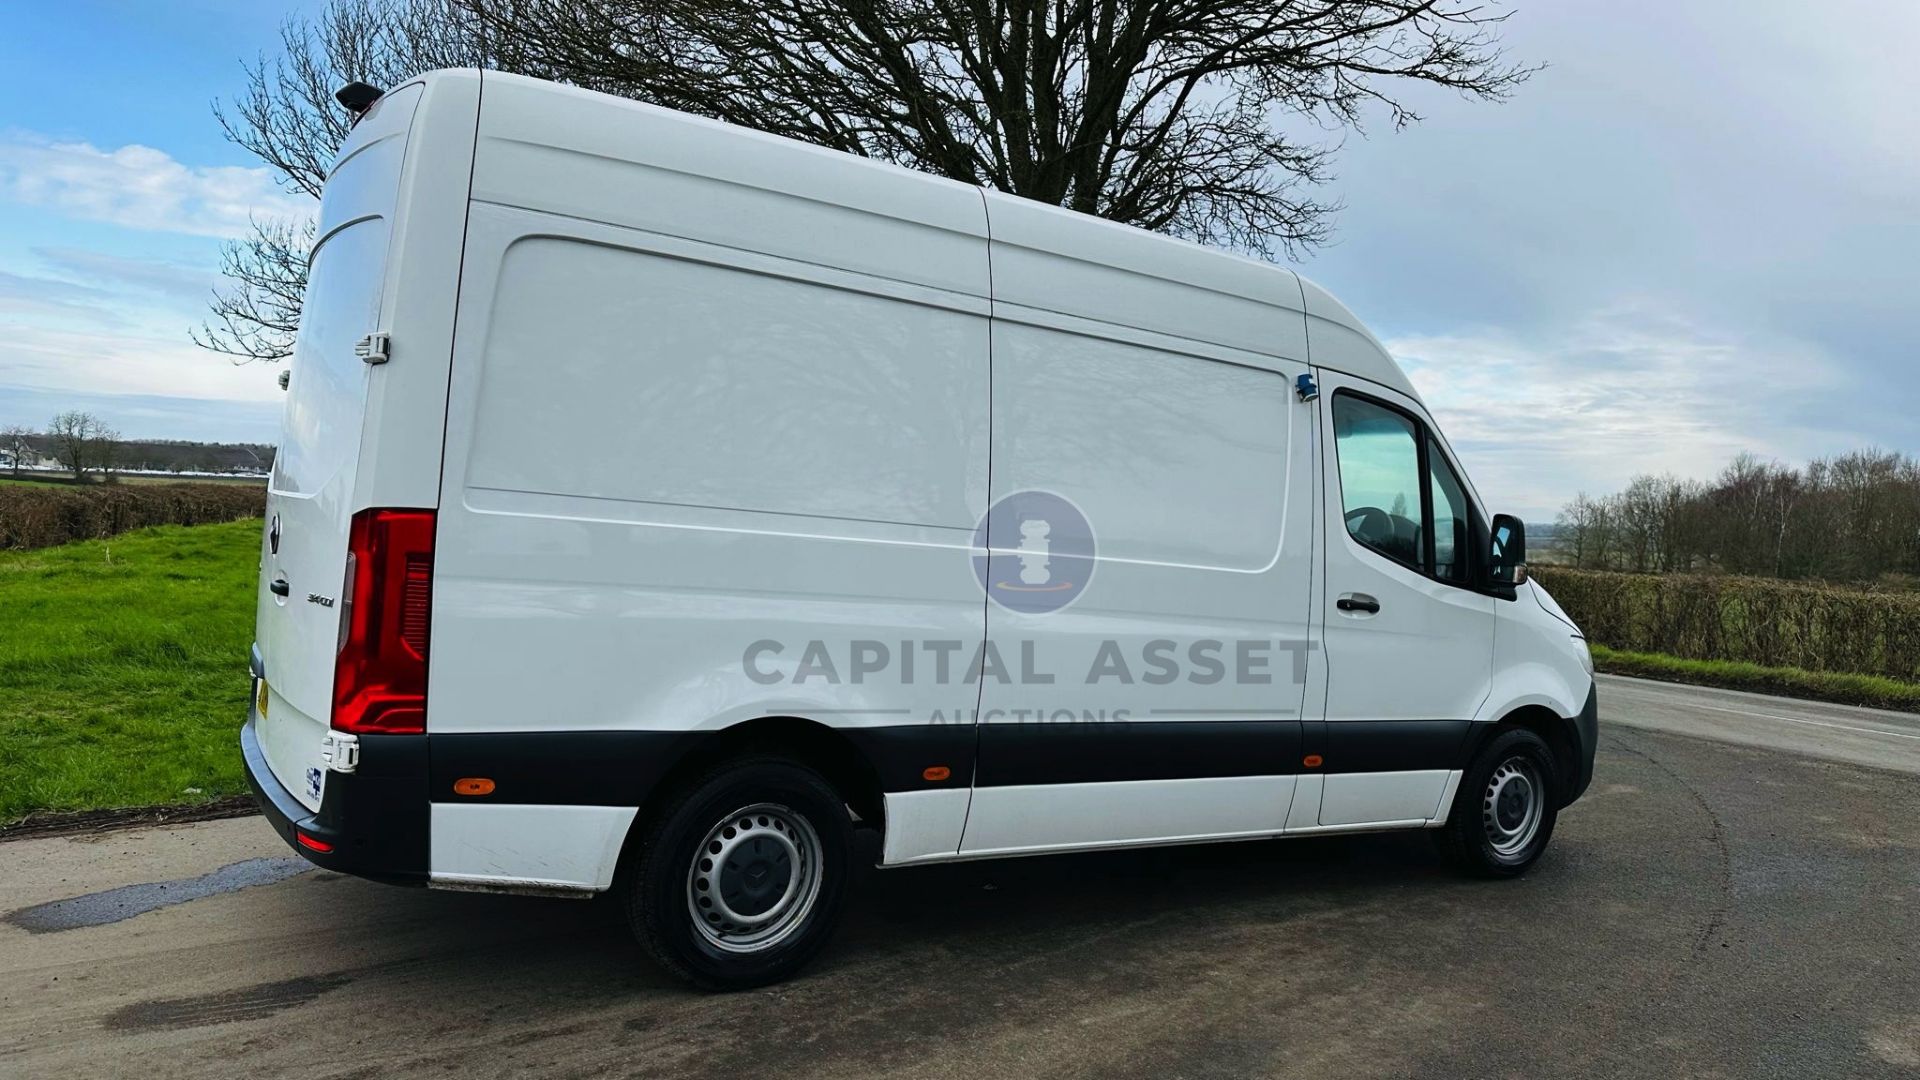 MERCEDES-BENZ SPRINTER 314 CDI *MWB - REFRIGERATED VAN* (2019 - FACELIFT MODEL) *OVERNIGHT STANDBY* - Image 14 of 41